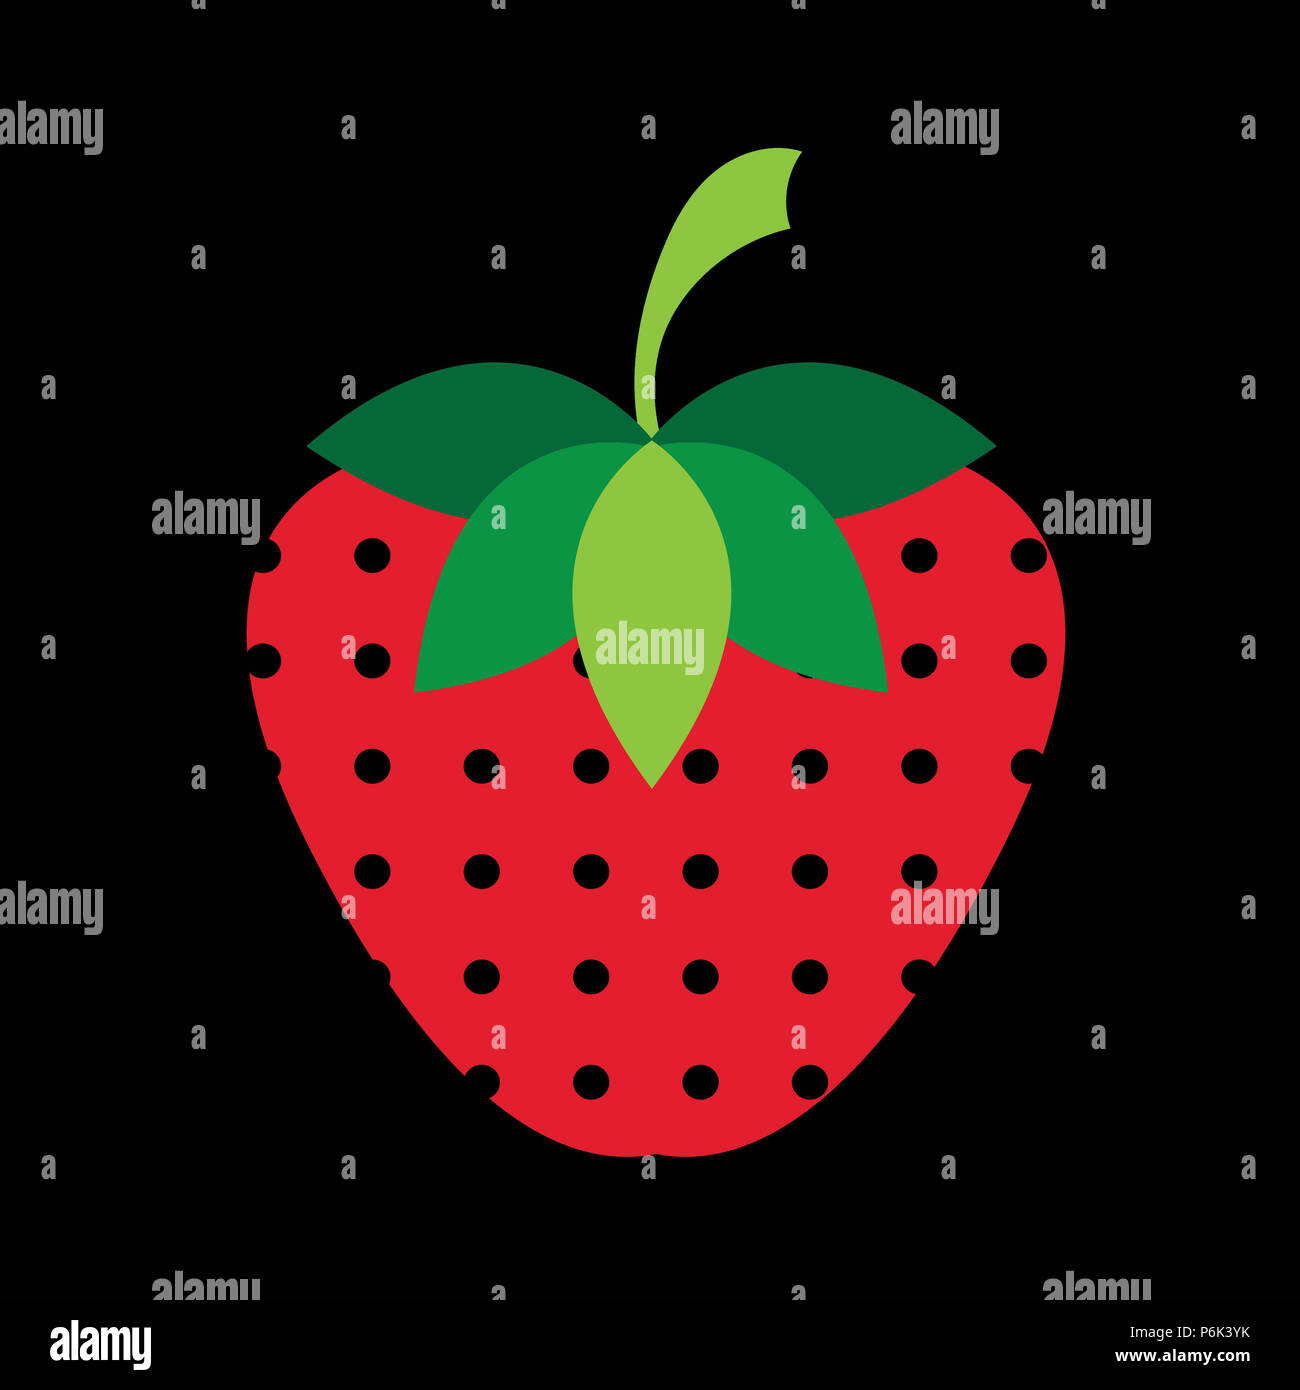 Illustration of a strawberry against a black background. Modern, dramatic, fresh. Stock Photo